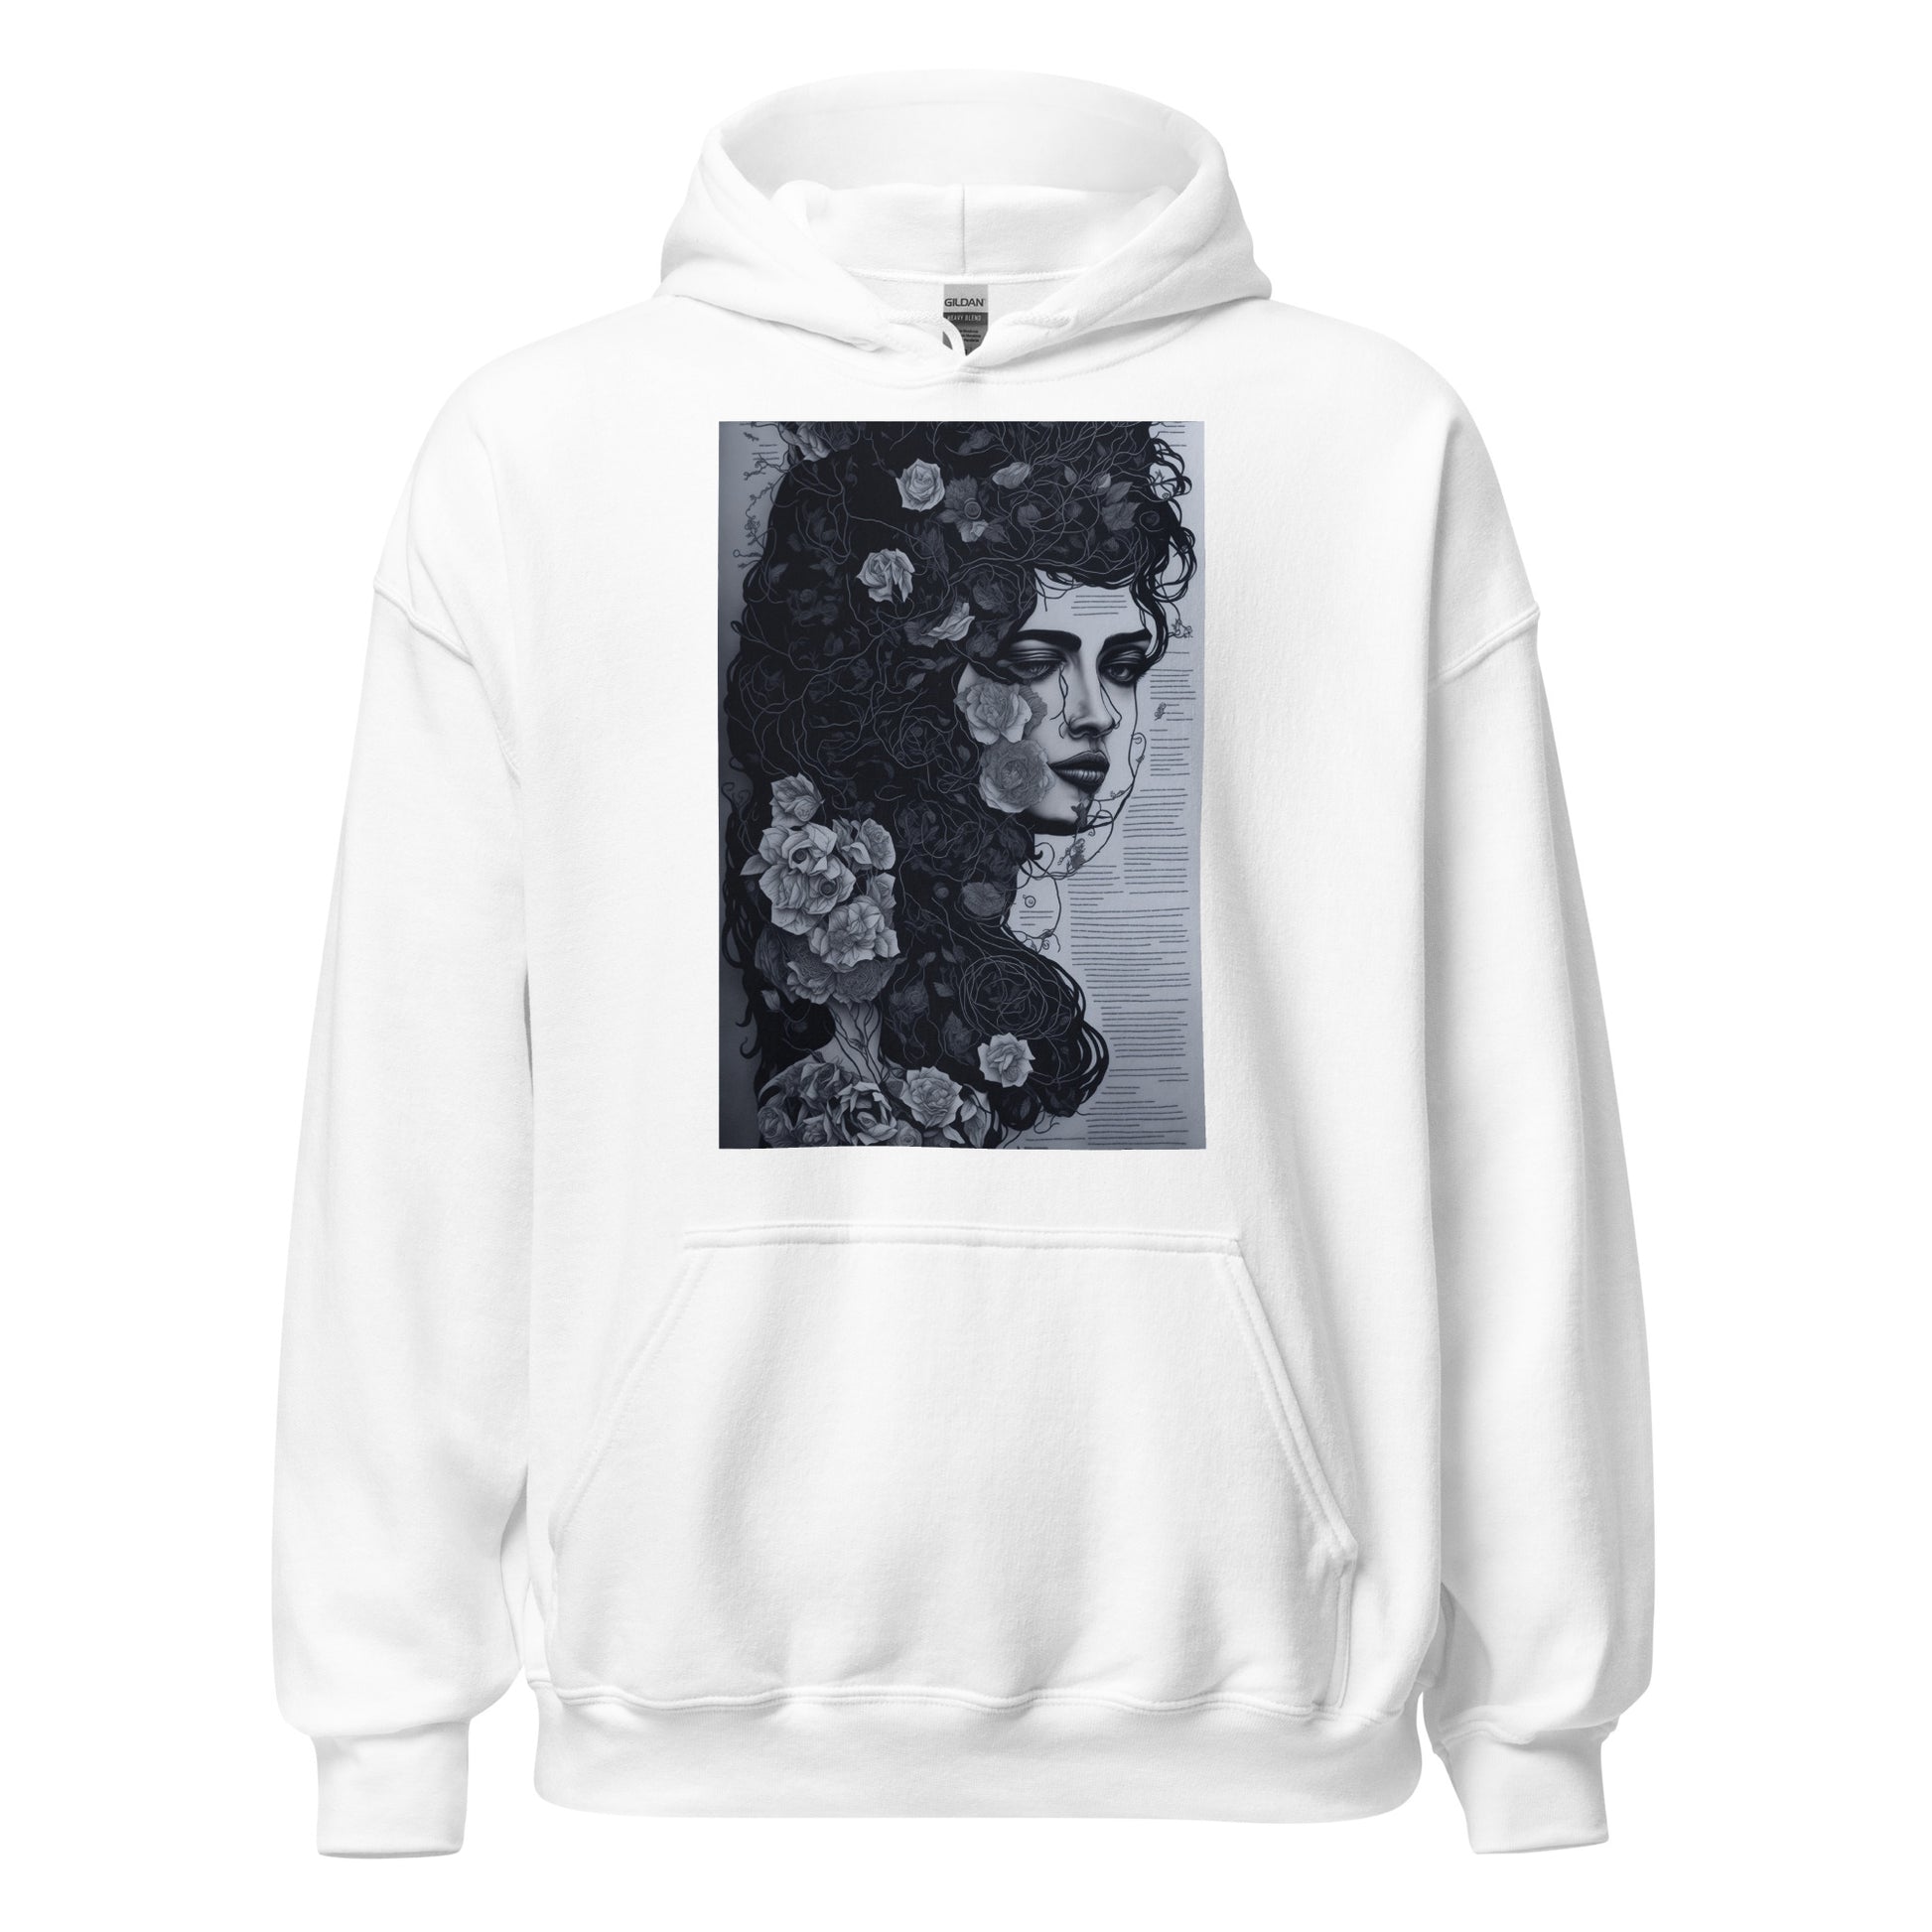 Embrace Authenticity Hoodie